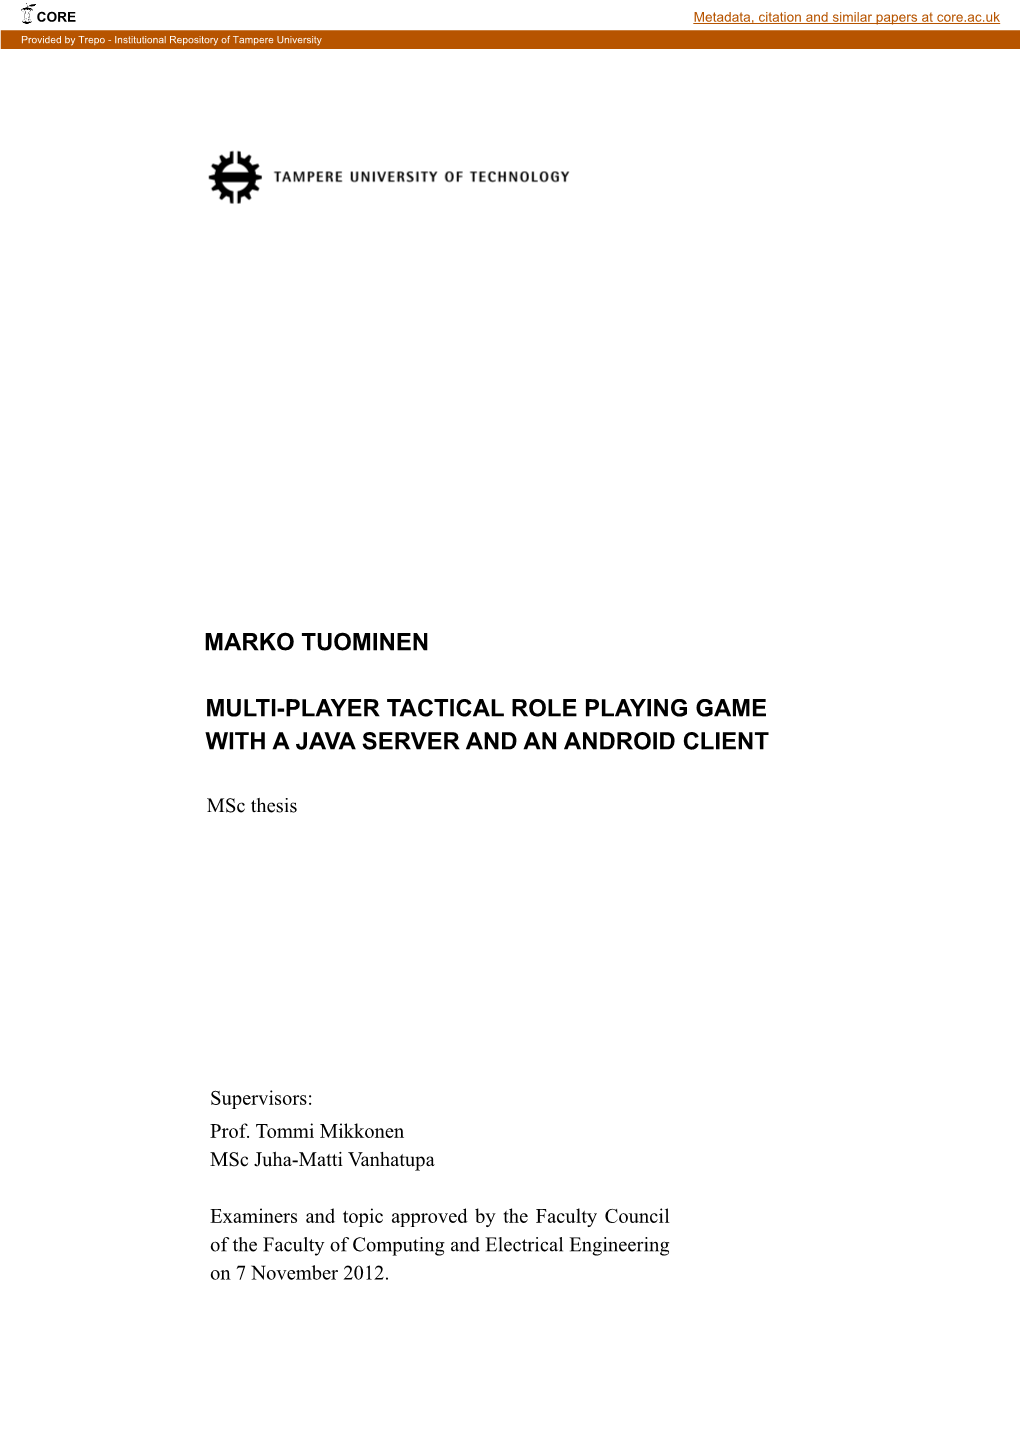 Marko Tuominen Multi-Player Tactical Role Playing Game